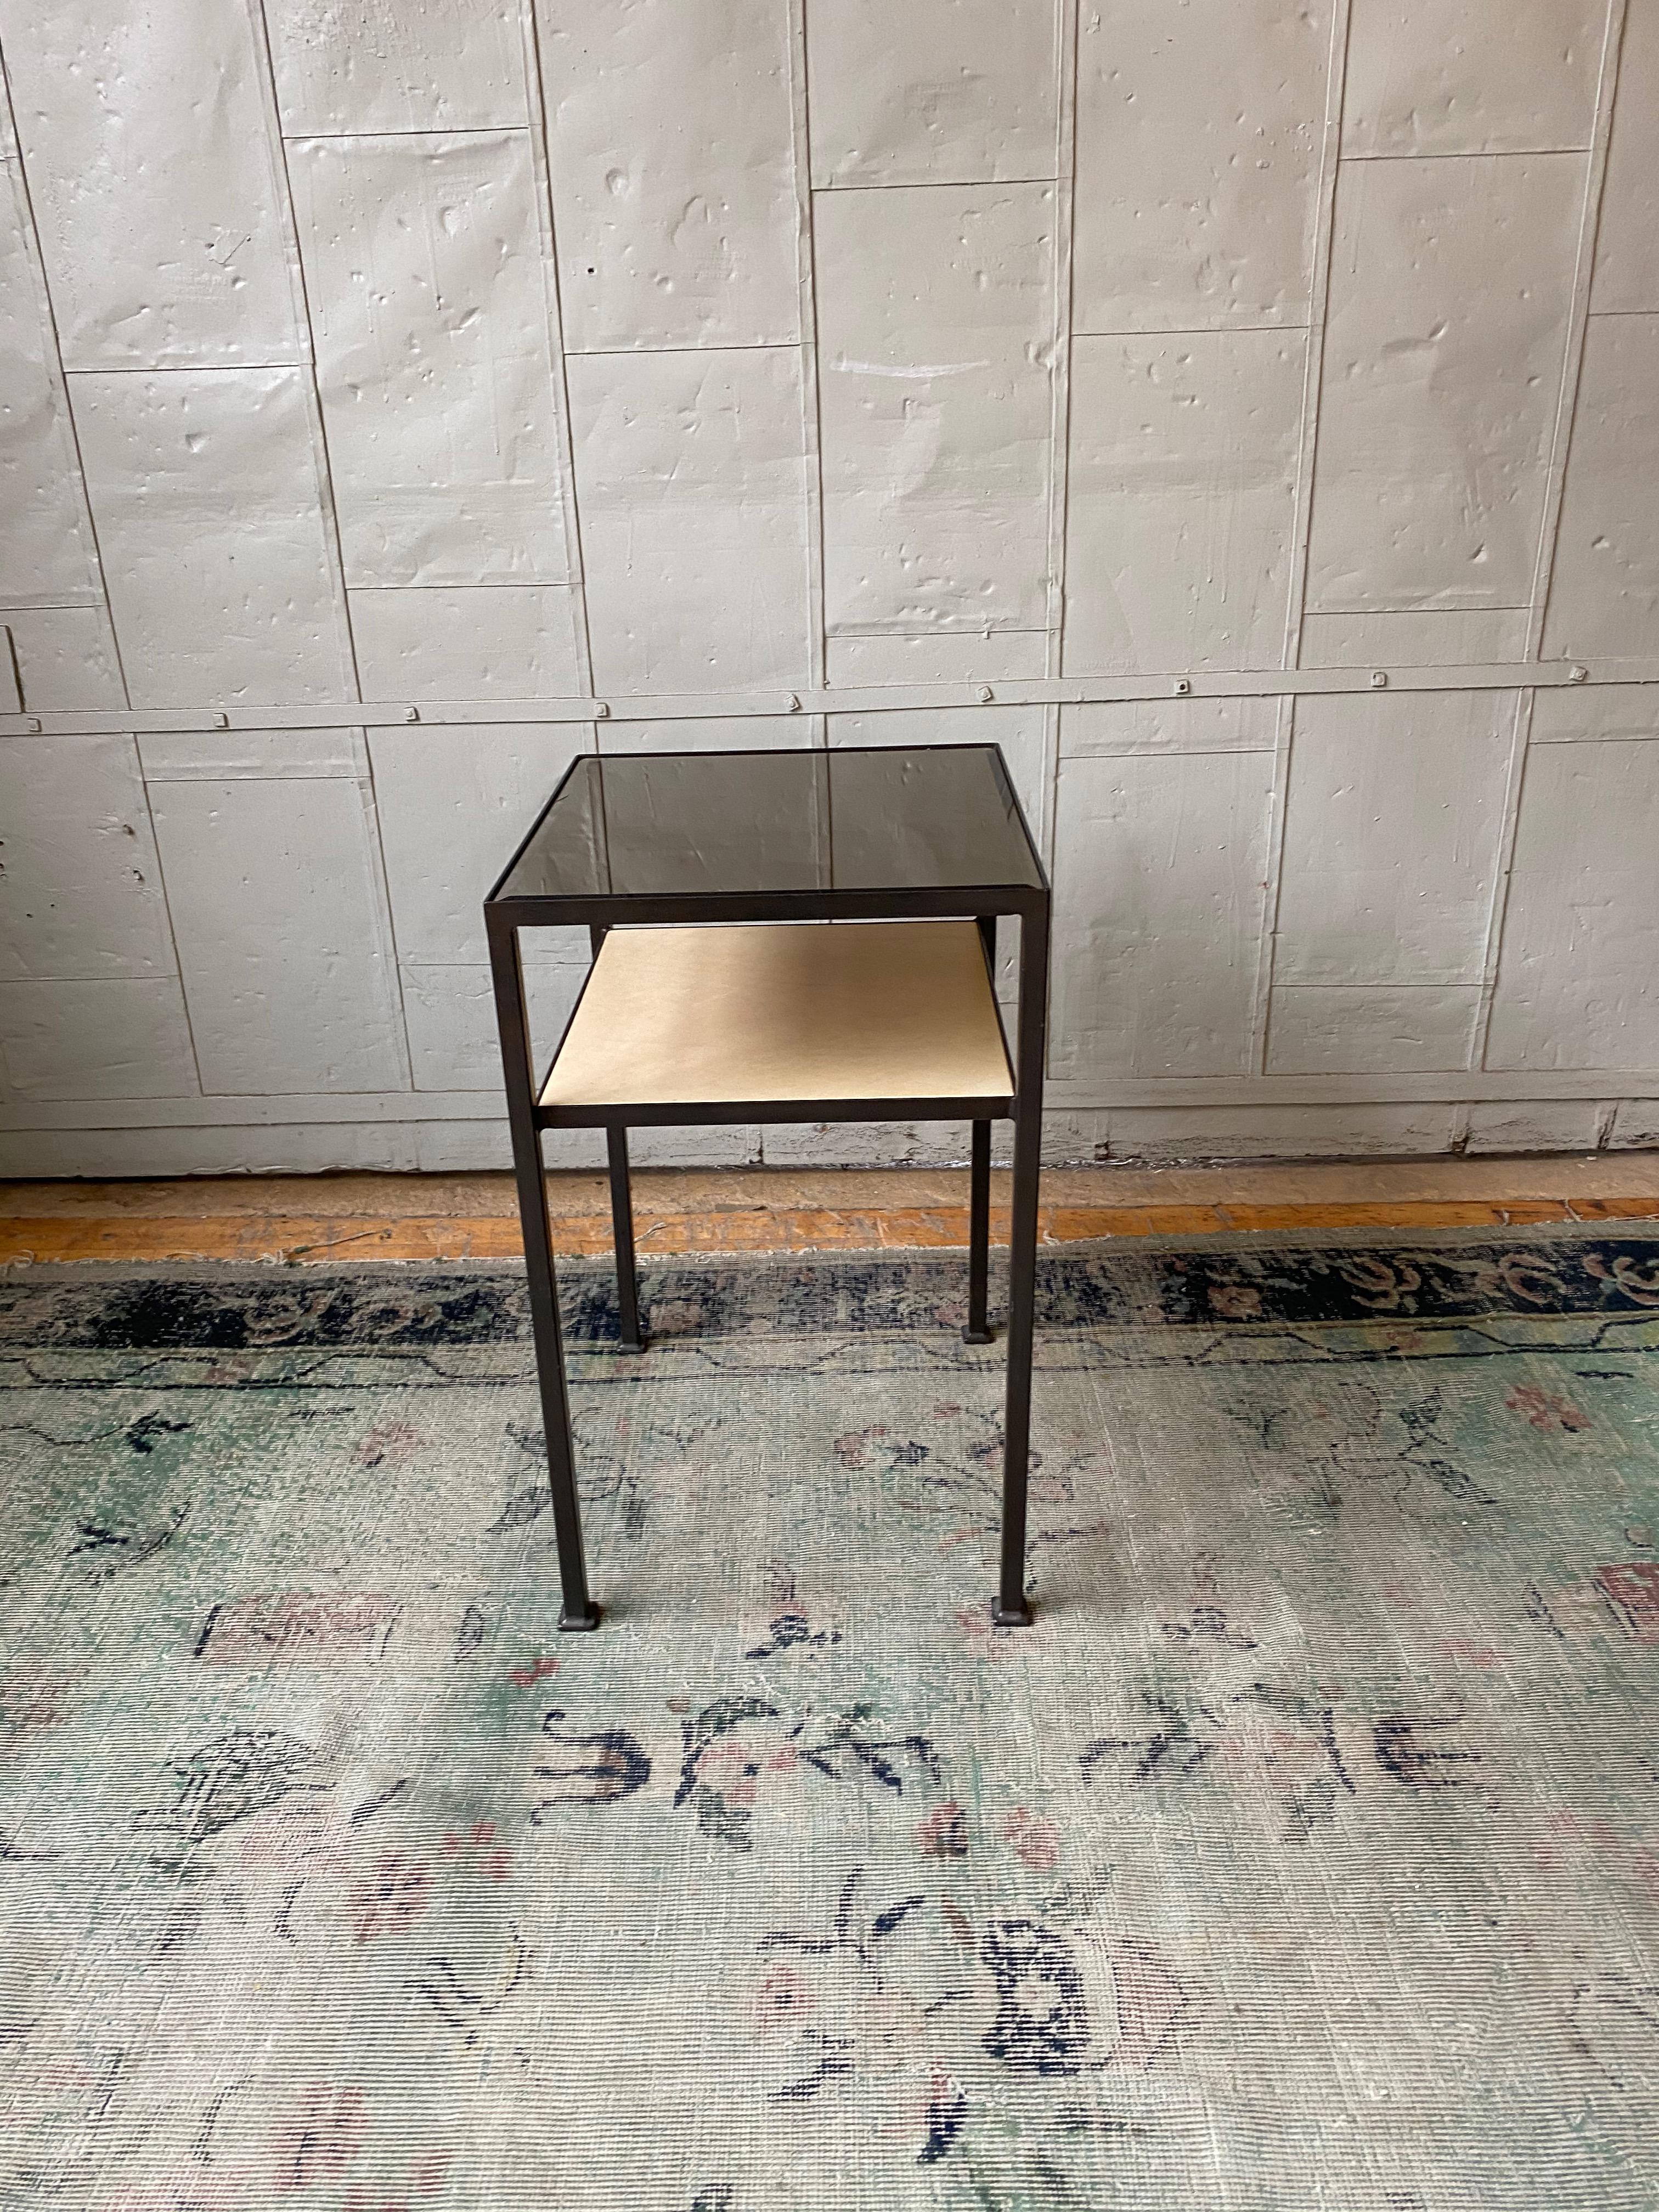 Marcelo Nightstand or End Table In Excellent Condition For Sale In Buchanan, NY